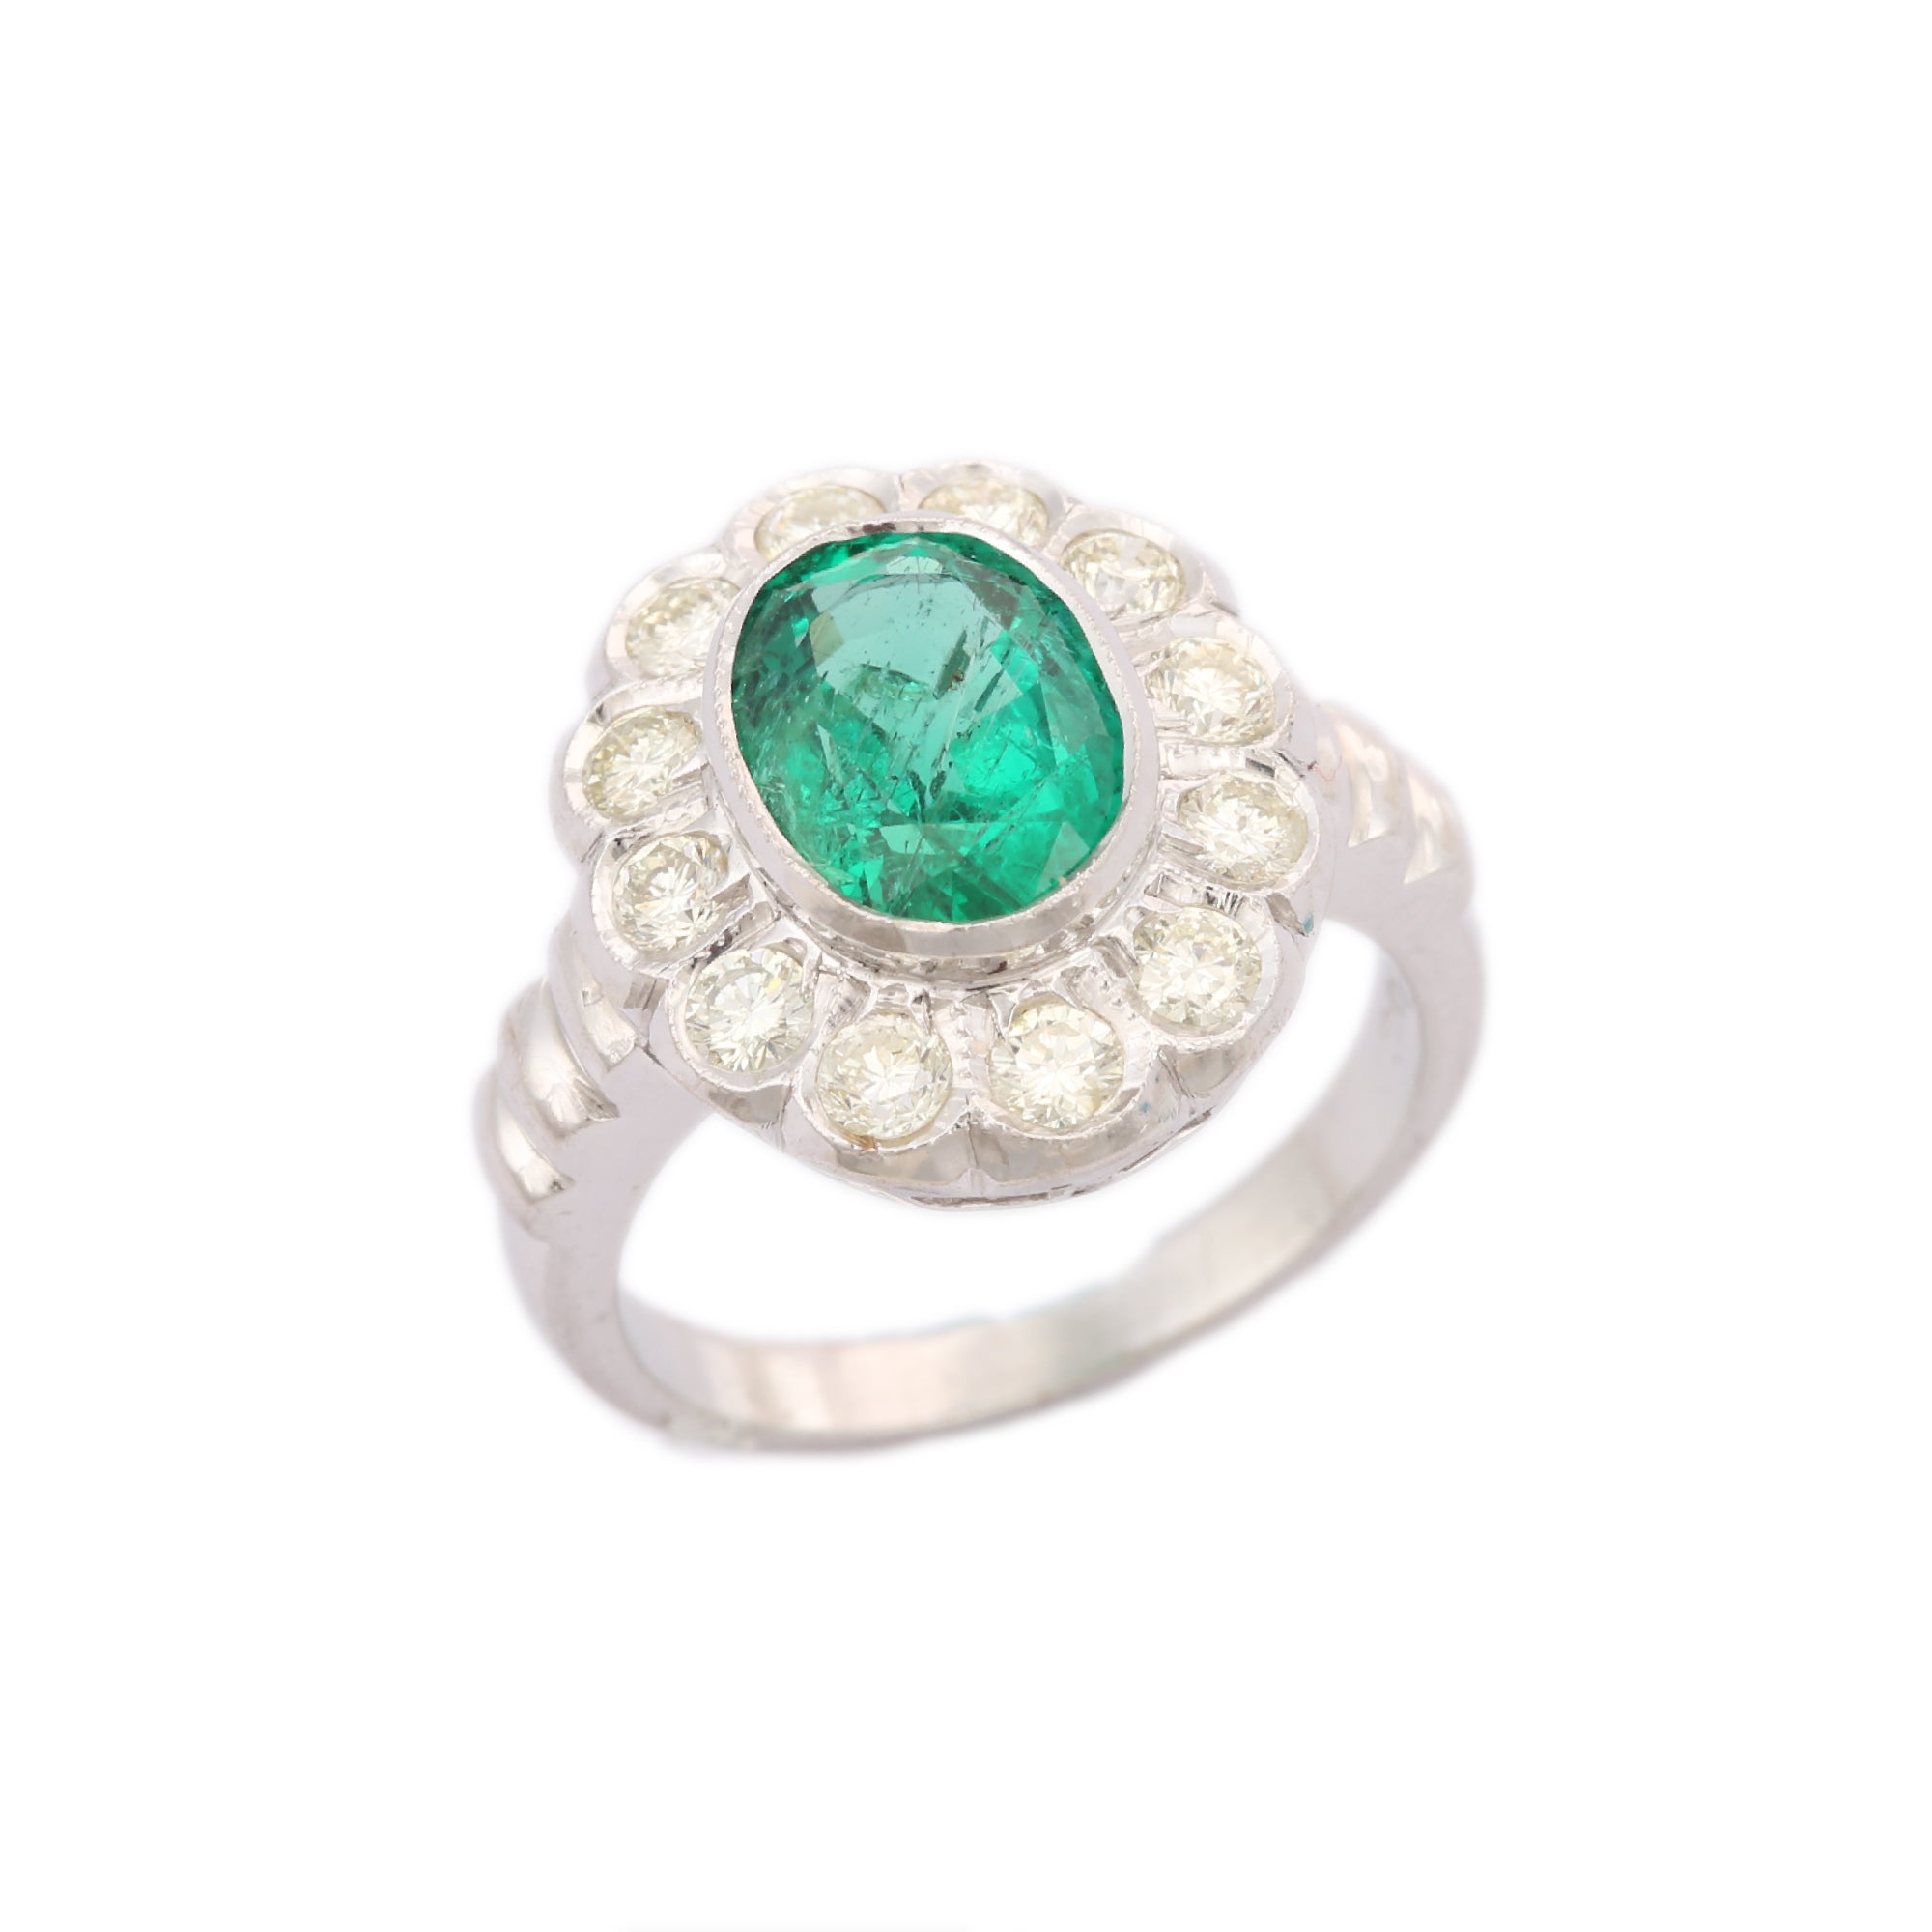 For Sale:  Exquisite 18kt Solid White Gold Emerald Flower Ring With Diamonds 3